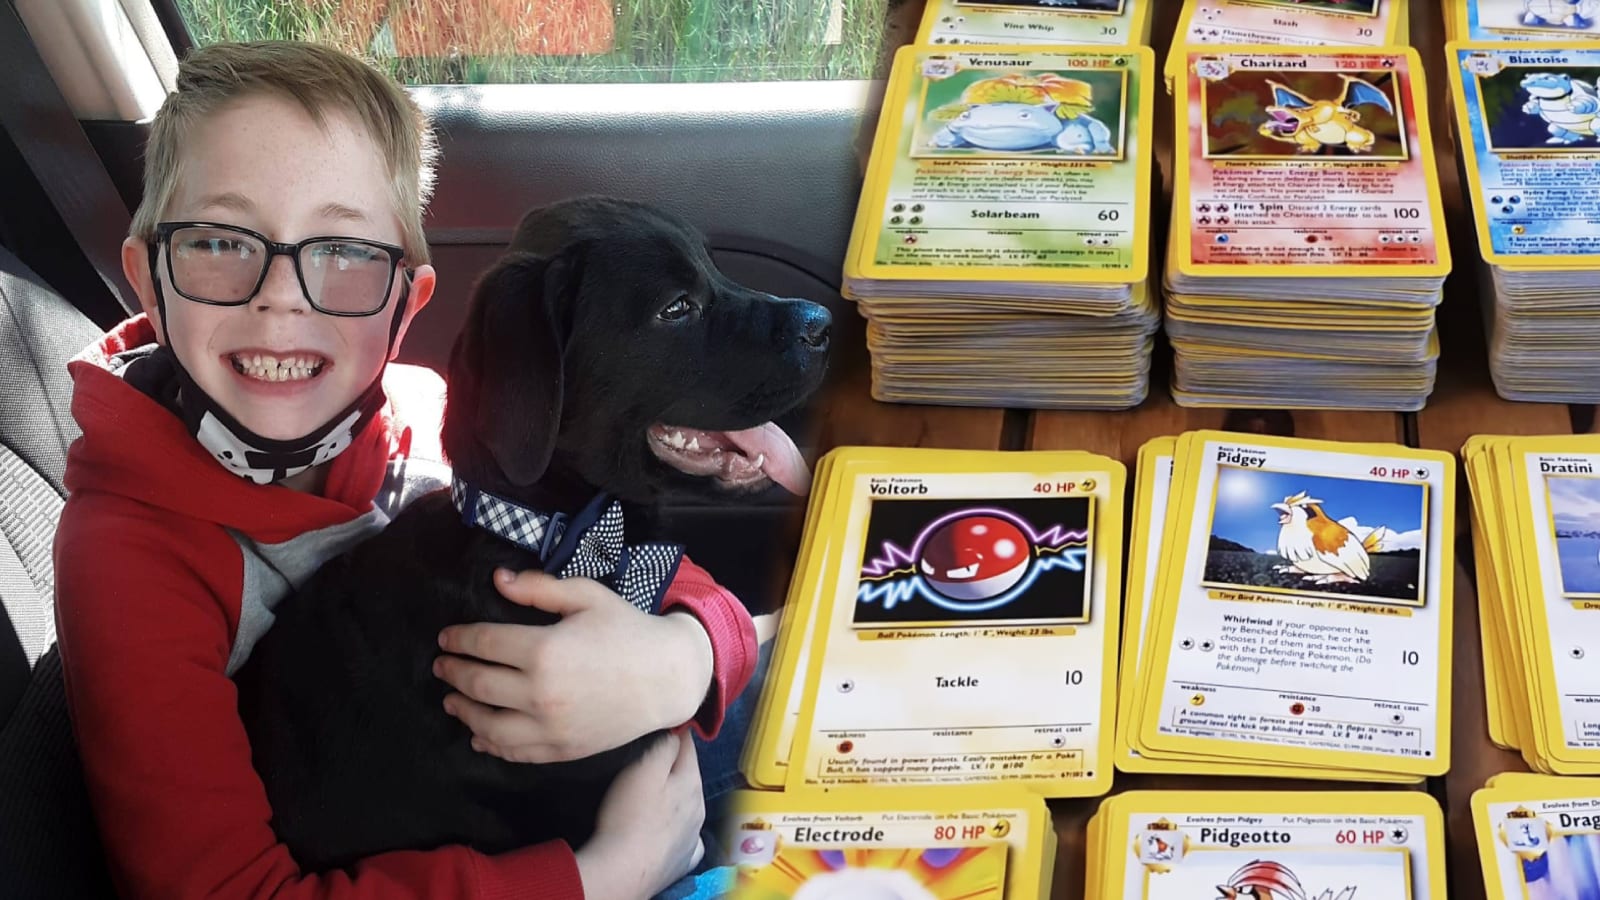 8-Year-Old Boy Sells His Pokemon Card Collection to Pay For His Sick Dog’s $700 Treatment